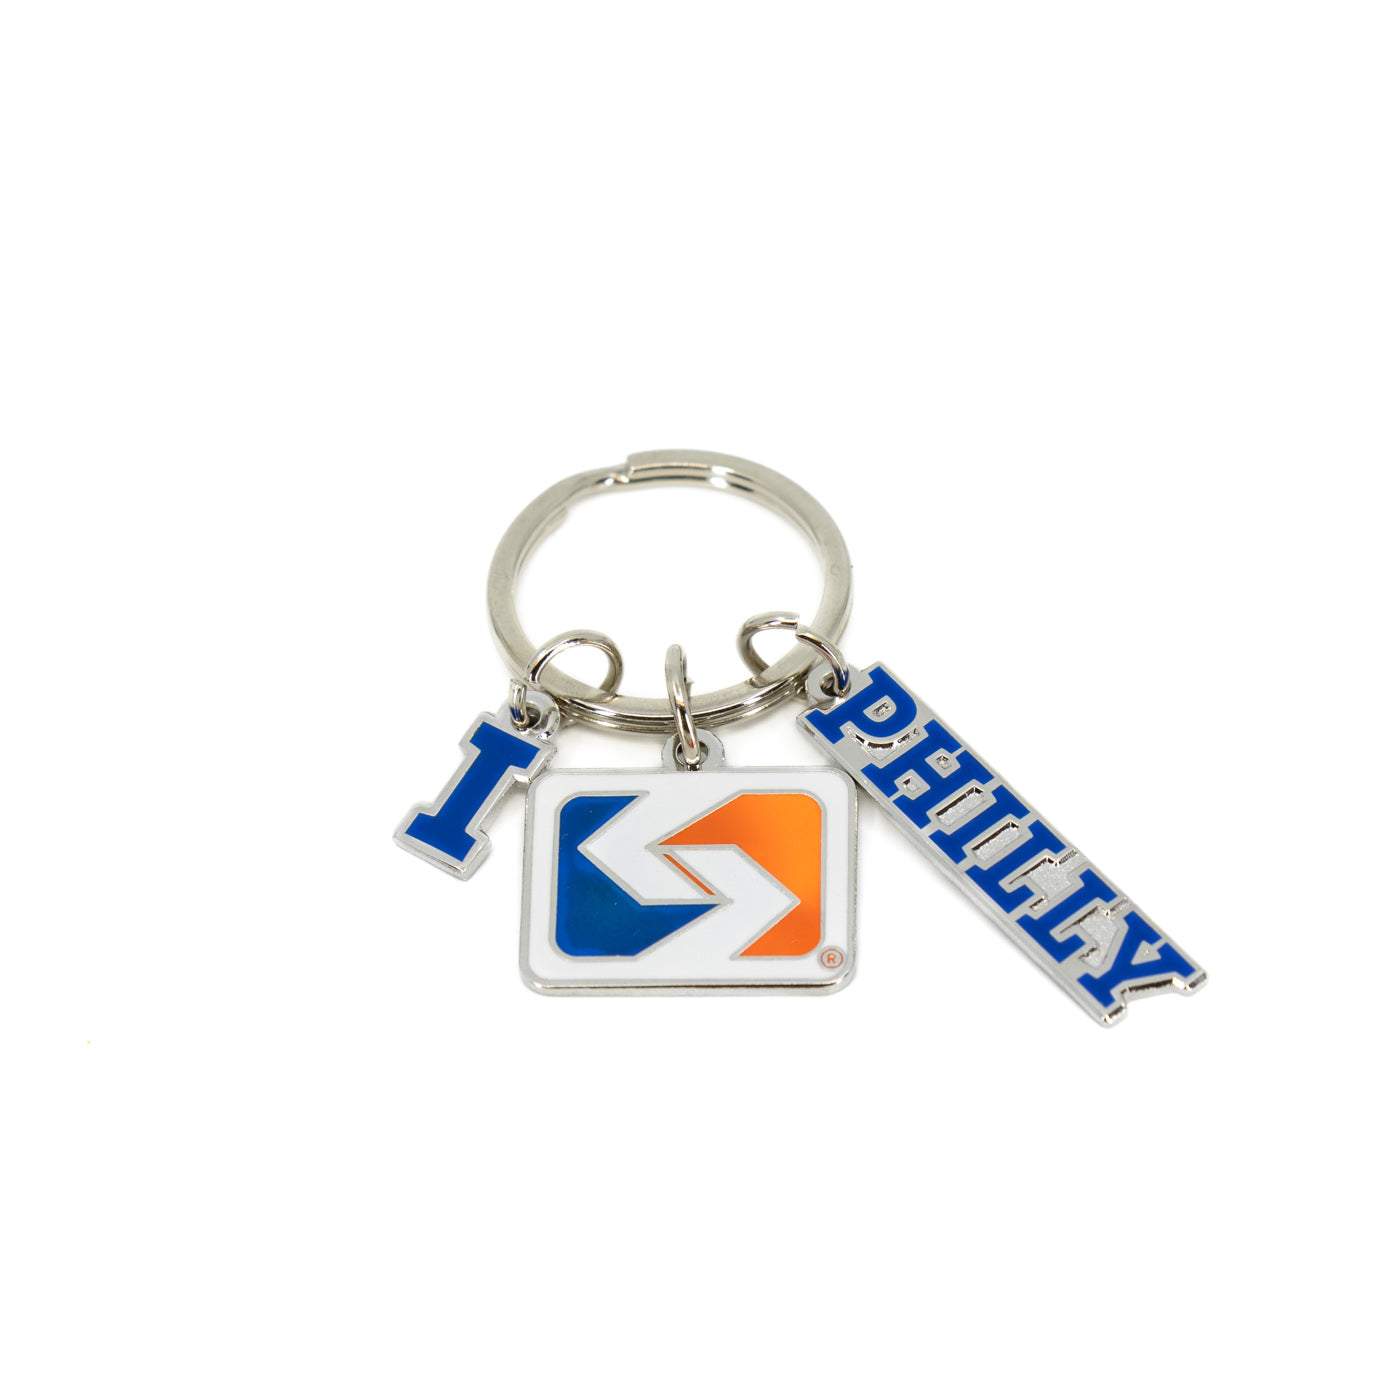 ISEPTAPhilly Keychain